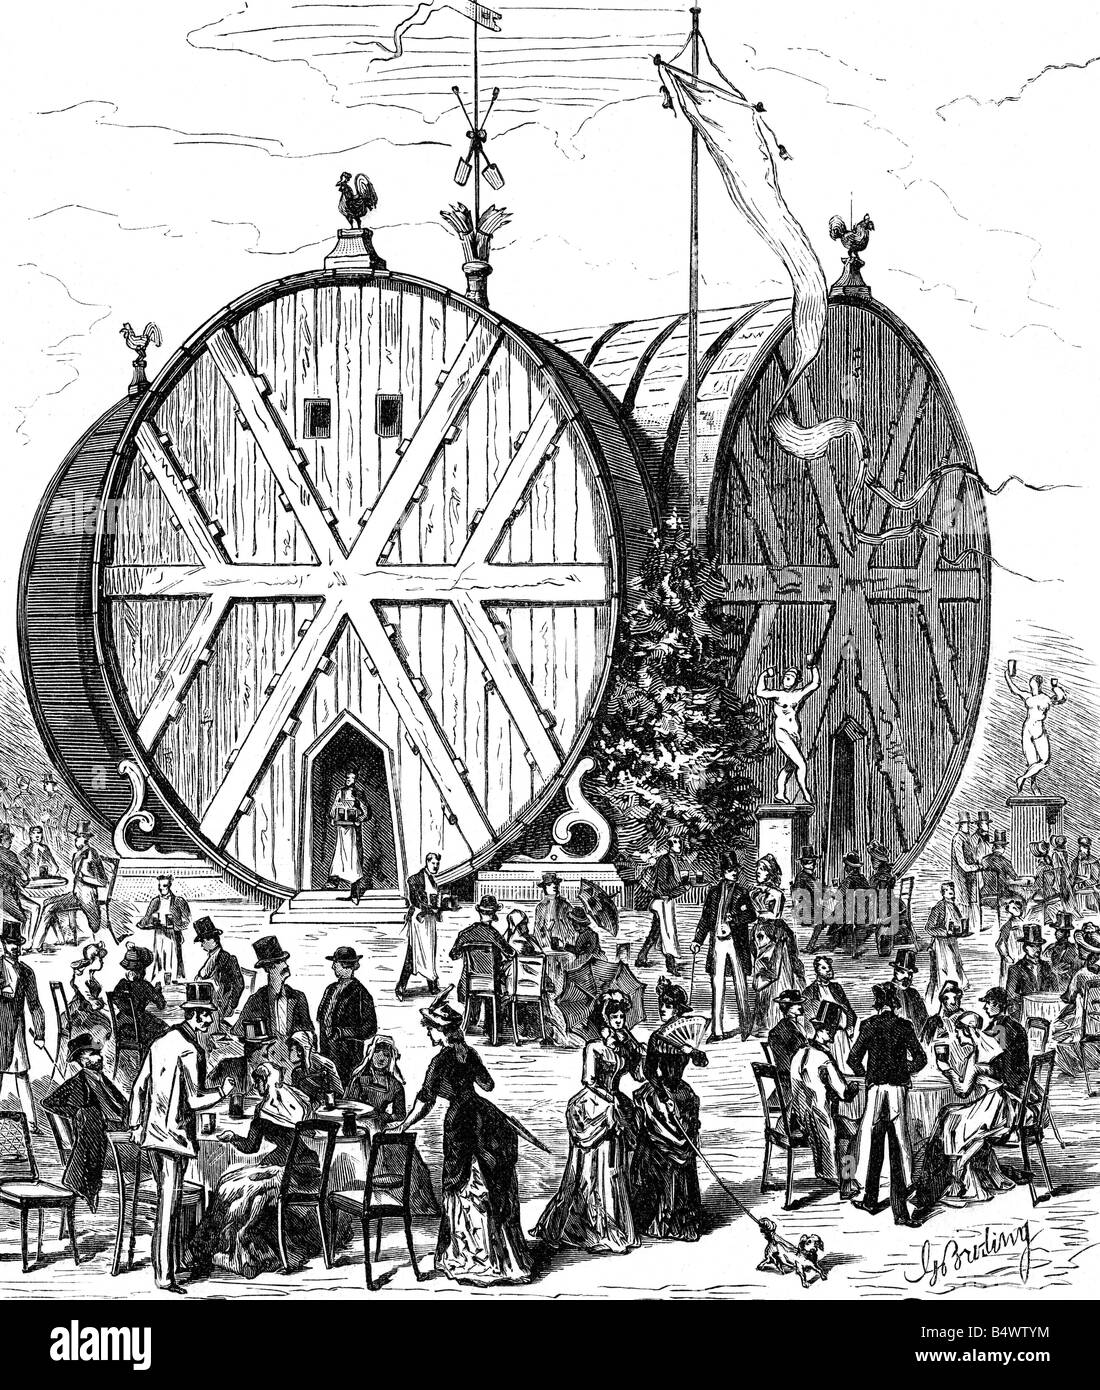 exhibitions, industry, International Colonial Exhibition, Amsterdam, 1883, gastronomy, Giant-Cask-Restaurant, wood engraving after drawing by L. von Eliot, September 1883, Giant Cask Restaurant, Netherlands, 19th century, historic, historical, people, Stock Photo